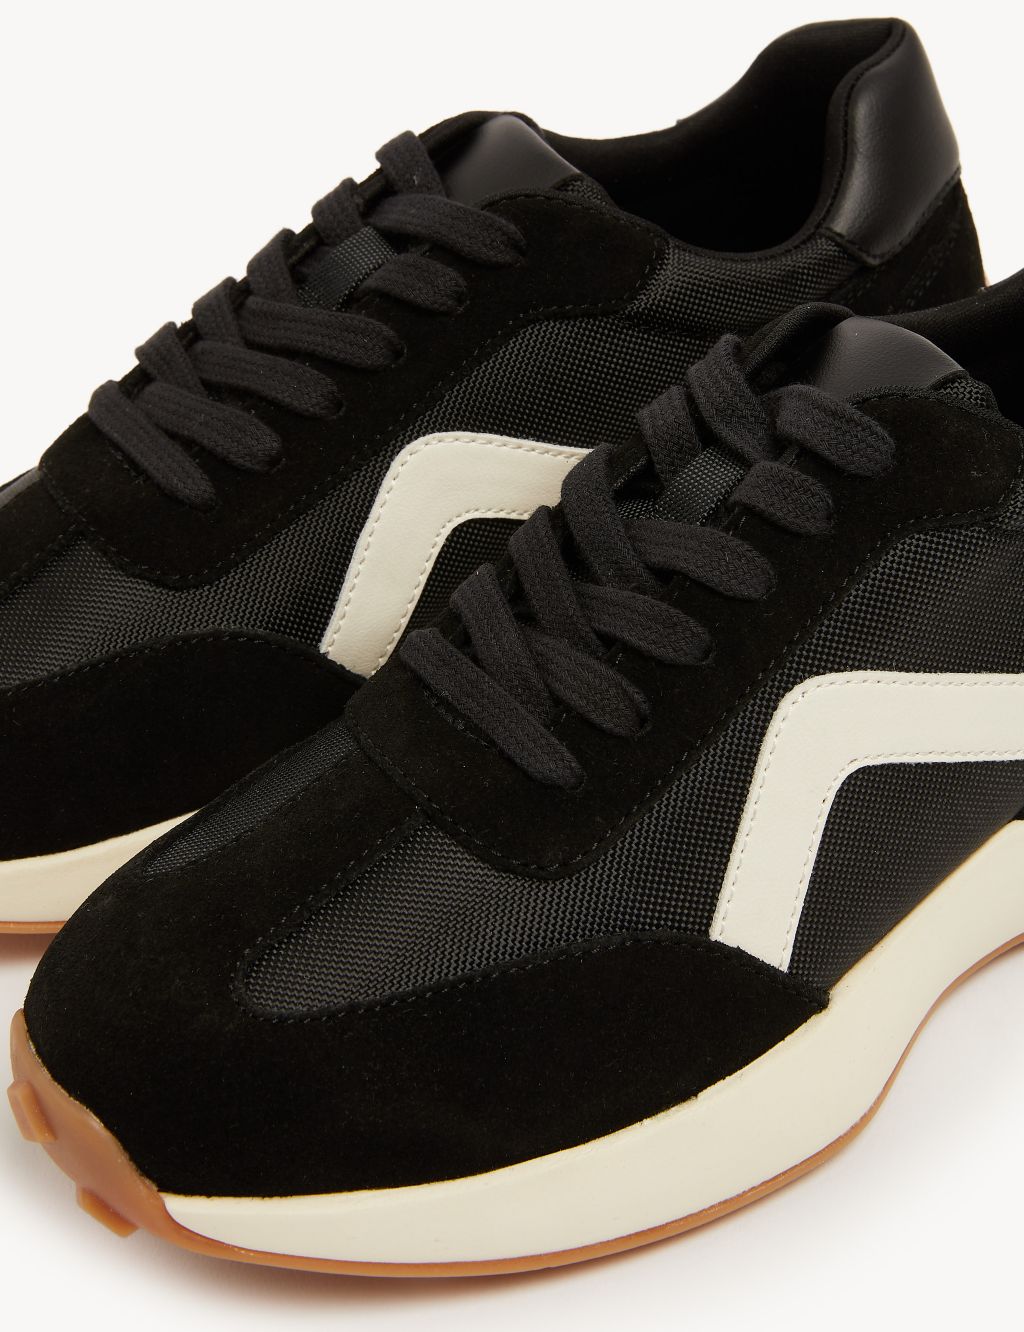 Leather Lace Up Side Detail Trainers image 2